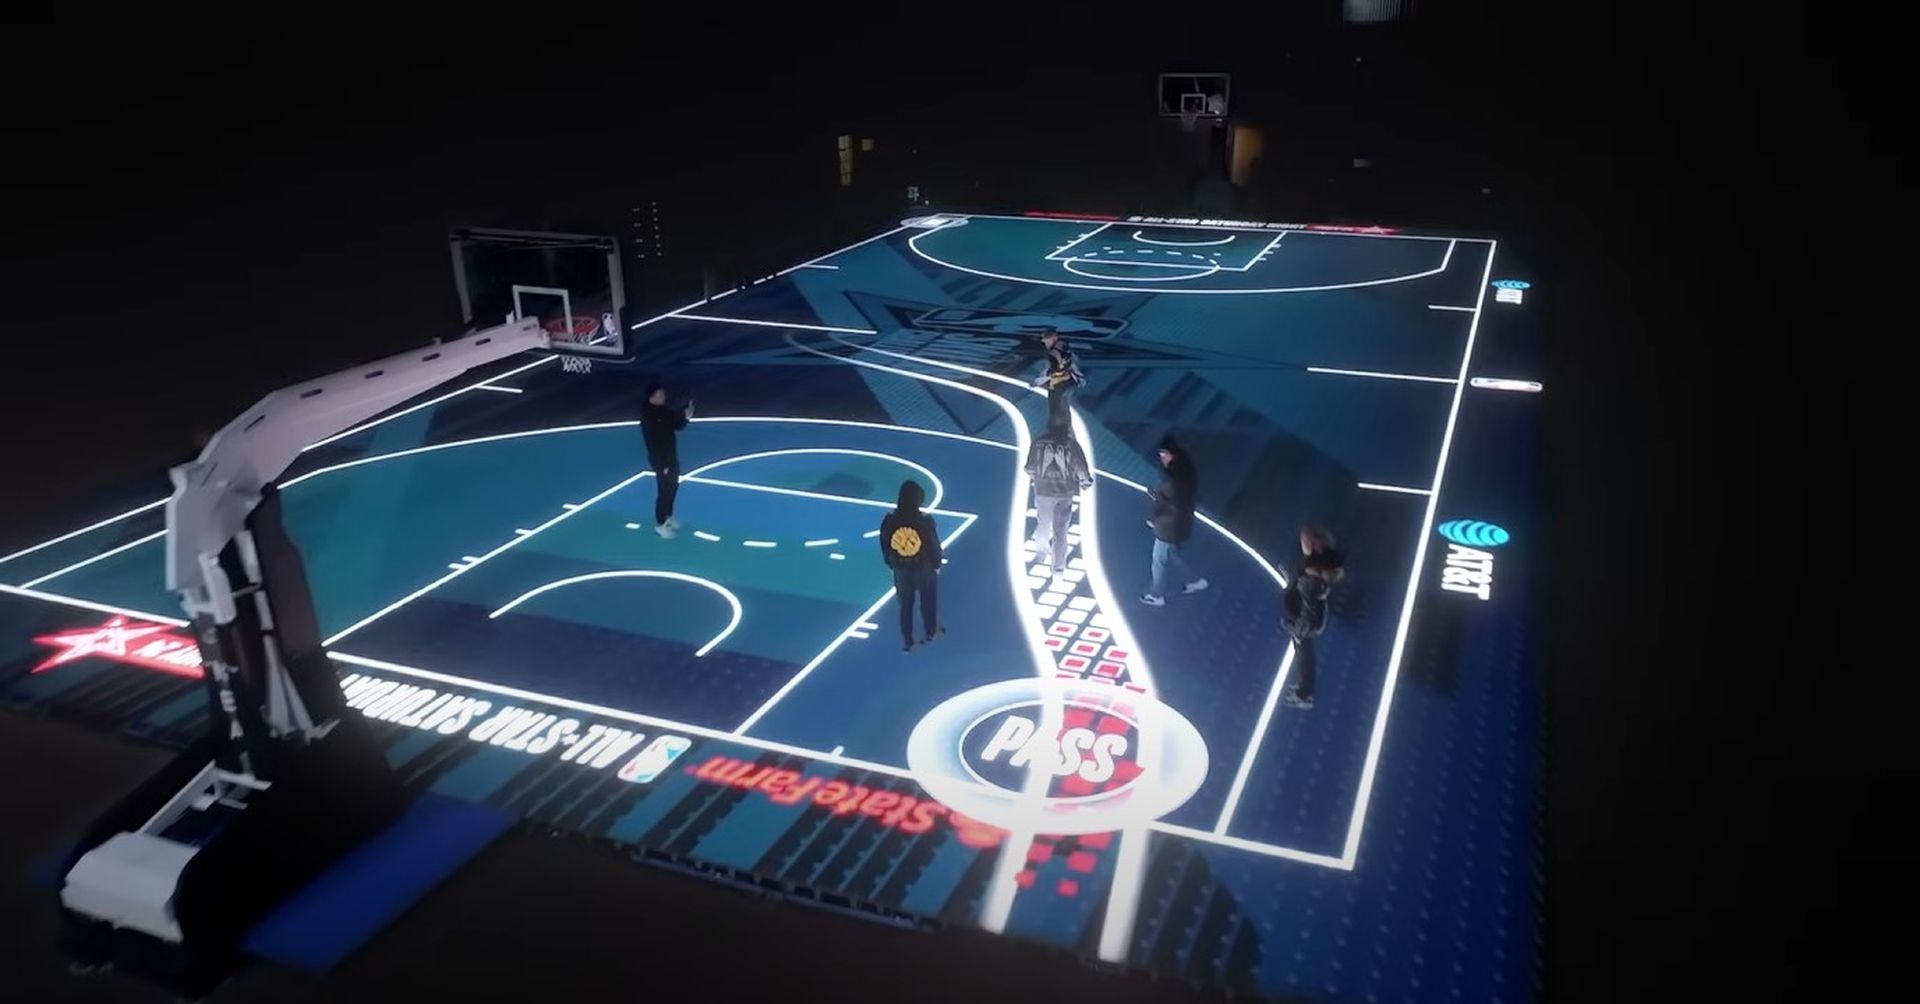 NBA LED floor will bring great moments to the audience